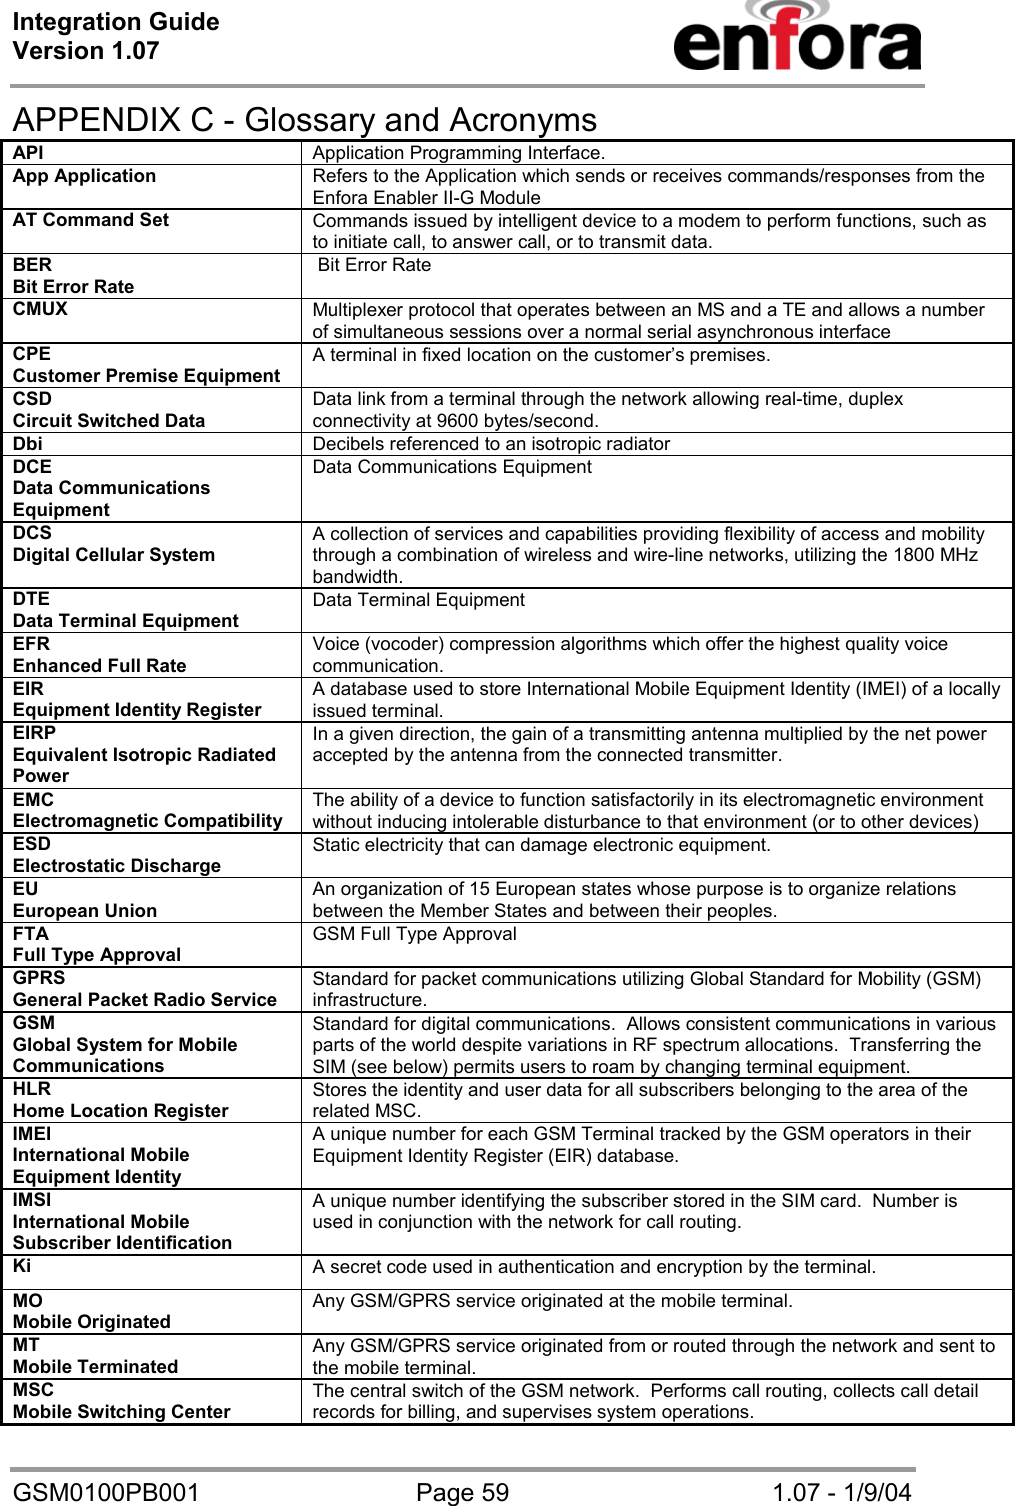 Integration Guide  Version 1.07   GSM0100PB001  Page 59  1.07 - 1/9/04 APPENDIX C - Glossary and Acronyms API  Application Programming Interface. App Application Refers to the Application which sends or receives commands/responses from the Enfora Enabler II-G Module AT Command Set  Commands issued by intelligent device to a modem to perform functions, such as to initiate call, to answer call, or to transmit data. BER Bit Error Rate  Bit Error Rate CMUX  Multiplexer protocol that operates between an MS and a TE and allows a number of simultaneous sessions over a normal serial asynchronous interface CPE Customer Premise Equipment A terminal in fixed location on the customer’s premises. CSD Circuit Switched Data Data link from a terminal through the network allowing real-time, duplex connectivity at 9600 bytes/second. Dbi Decibels referenced to an isotropic radiator DCE Data Communications Equipment Data Communications Equipment DCS Digital Cellular System A collection of services and capabilities providing flexibility of access and mobility through a combination of wireless and wire-line networks, utilizing the 1800 MHz bandwidth. DTE Data Terminal Equipment Data Terminal Equipment EFR Enhanced Full Rate Voice (vocoder) compression algorithms which offer the highest quality voice communication. EIR Equipment Identity Register A database used to store International Mobile Equipment Identity (IMEI) of a locally issued terminal. EIRP Equivalent Isotropic Radiated Power In a given direction, the gain of a transmitting antenna multiplied by the net power accepted by the antenna from the connected transmitter. EMC Electromagnetic Compatibility The ability of a device to function satisfactorily in its electromagnetic environment without inducing intolerable disturbance to that environment (or to other devices) ESD Electrostatic Discharge Static electricity that can damage electronic equipment. EU European Union An organization of 15 European states whose purpose is to organize relations between the Member States and between their peoples. FTA Full Type Approval GSM Full Type Approval GPRS General Packet Radio Service Standard for packet communications utilizing Global Standard for Mobility (GSM) infrastructure. GSM Global System for Mobile Communications Standard for digital communications.  Allows consistent communications in various parts of the world despite variations in RF spectrum allocations.  Transferring the SIM (see below) permits users to roam by changing terminal equipment. HLR Home Location Register Stores the identity and user data for all subscribers belonging to the area of the related MSC.  IMEI International Mobile Equipment Identity A unique number for each GSM Terminal tracked by the GSM operators in their Equipment Identity Register (EIR) database. IMSI International Mobile Subscriber Identification A unique number identifying the subscriber stored in the SIM card.  Number is used in conjunction with the network for call routing. Ki A secret code used in authentication and encryption by the terminal. MO Mobile Originated Any GSM/GPRS service originated at the mobile terminal. MT Mobile Terminated Any GSM/GPRS service originated from or routed through the network and sent to the mobile terminal. MSC Mobile Switching Center The central switch of the GSM network.  Performs call routing, collects call detail records for billing, and supervises system operations. 